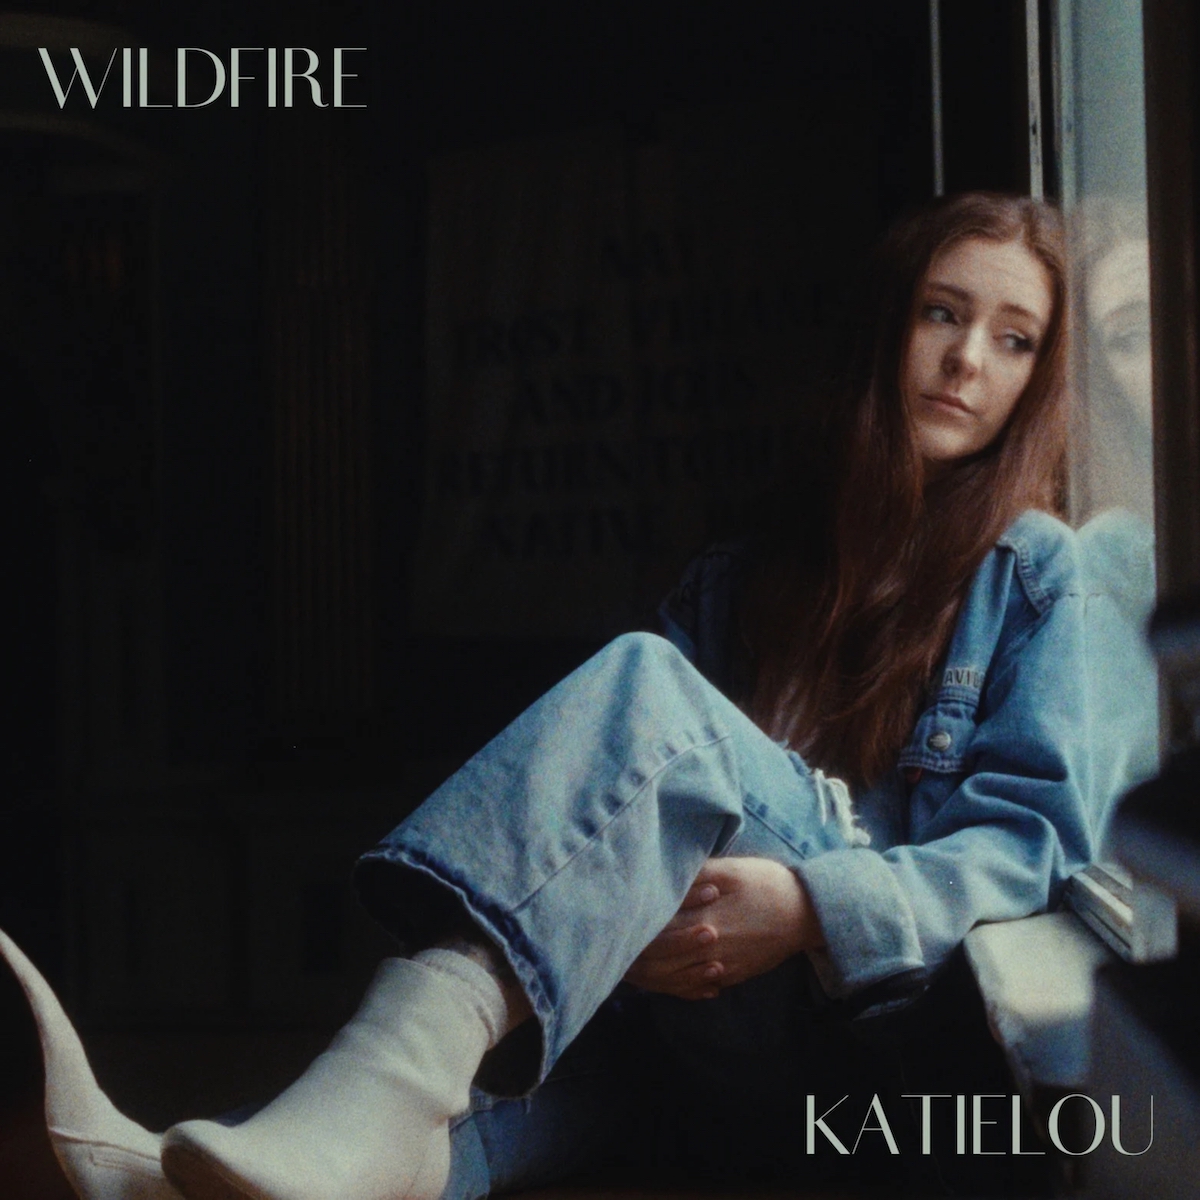 DEBUT ALBUM REVIEW: Wildfire by Katielou